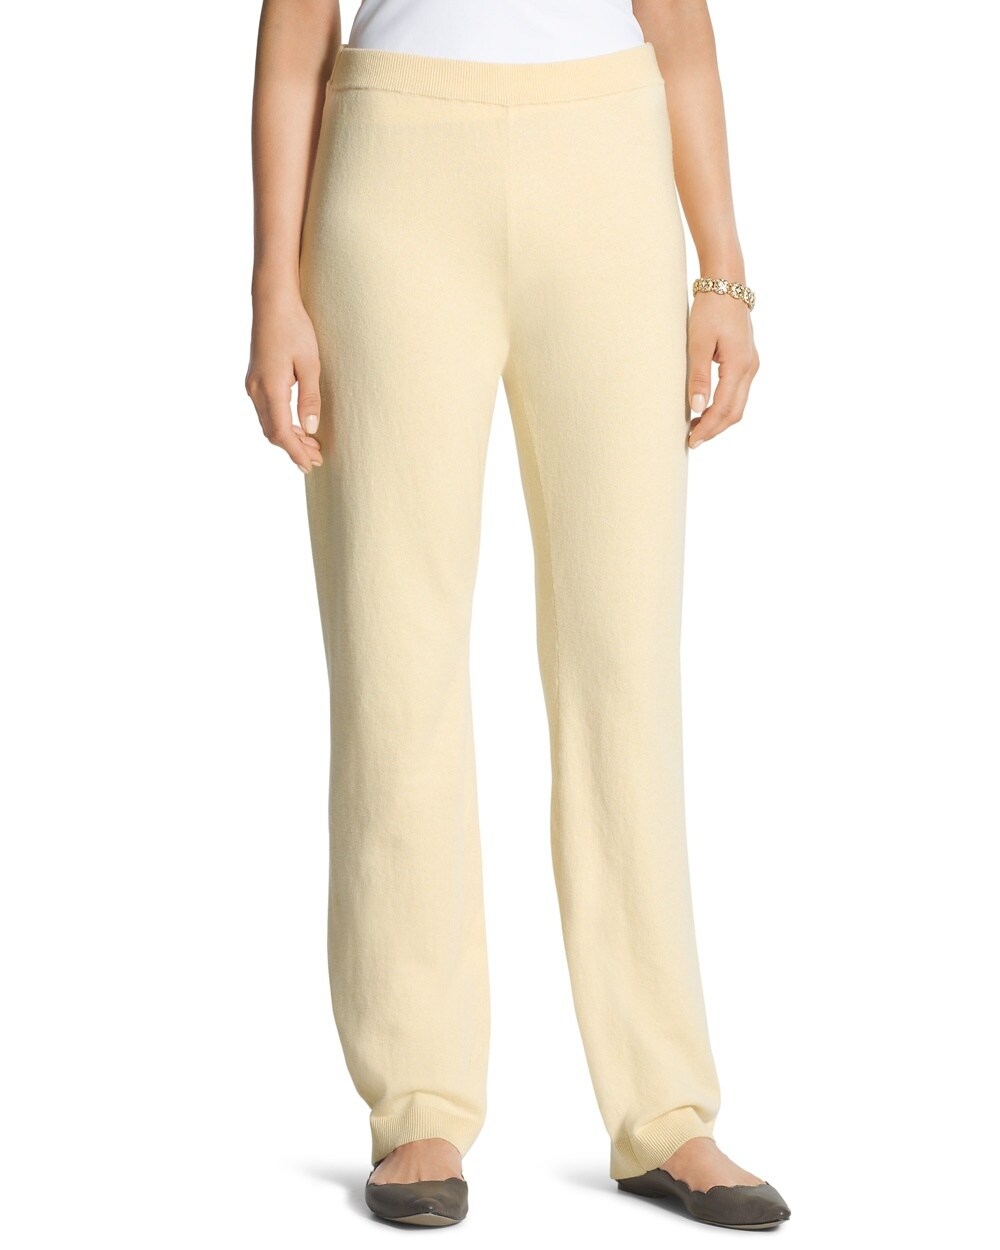 Zenergy Cotton Cashmere Pants in Seawhip Yellow